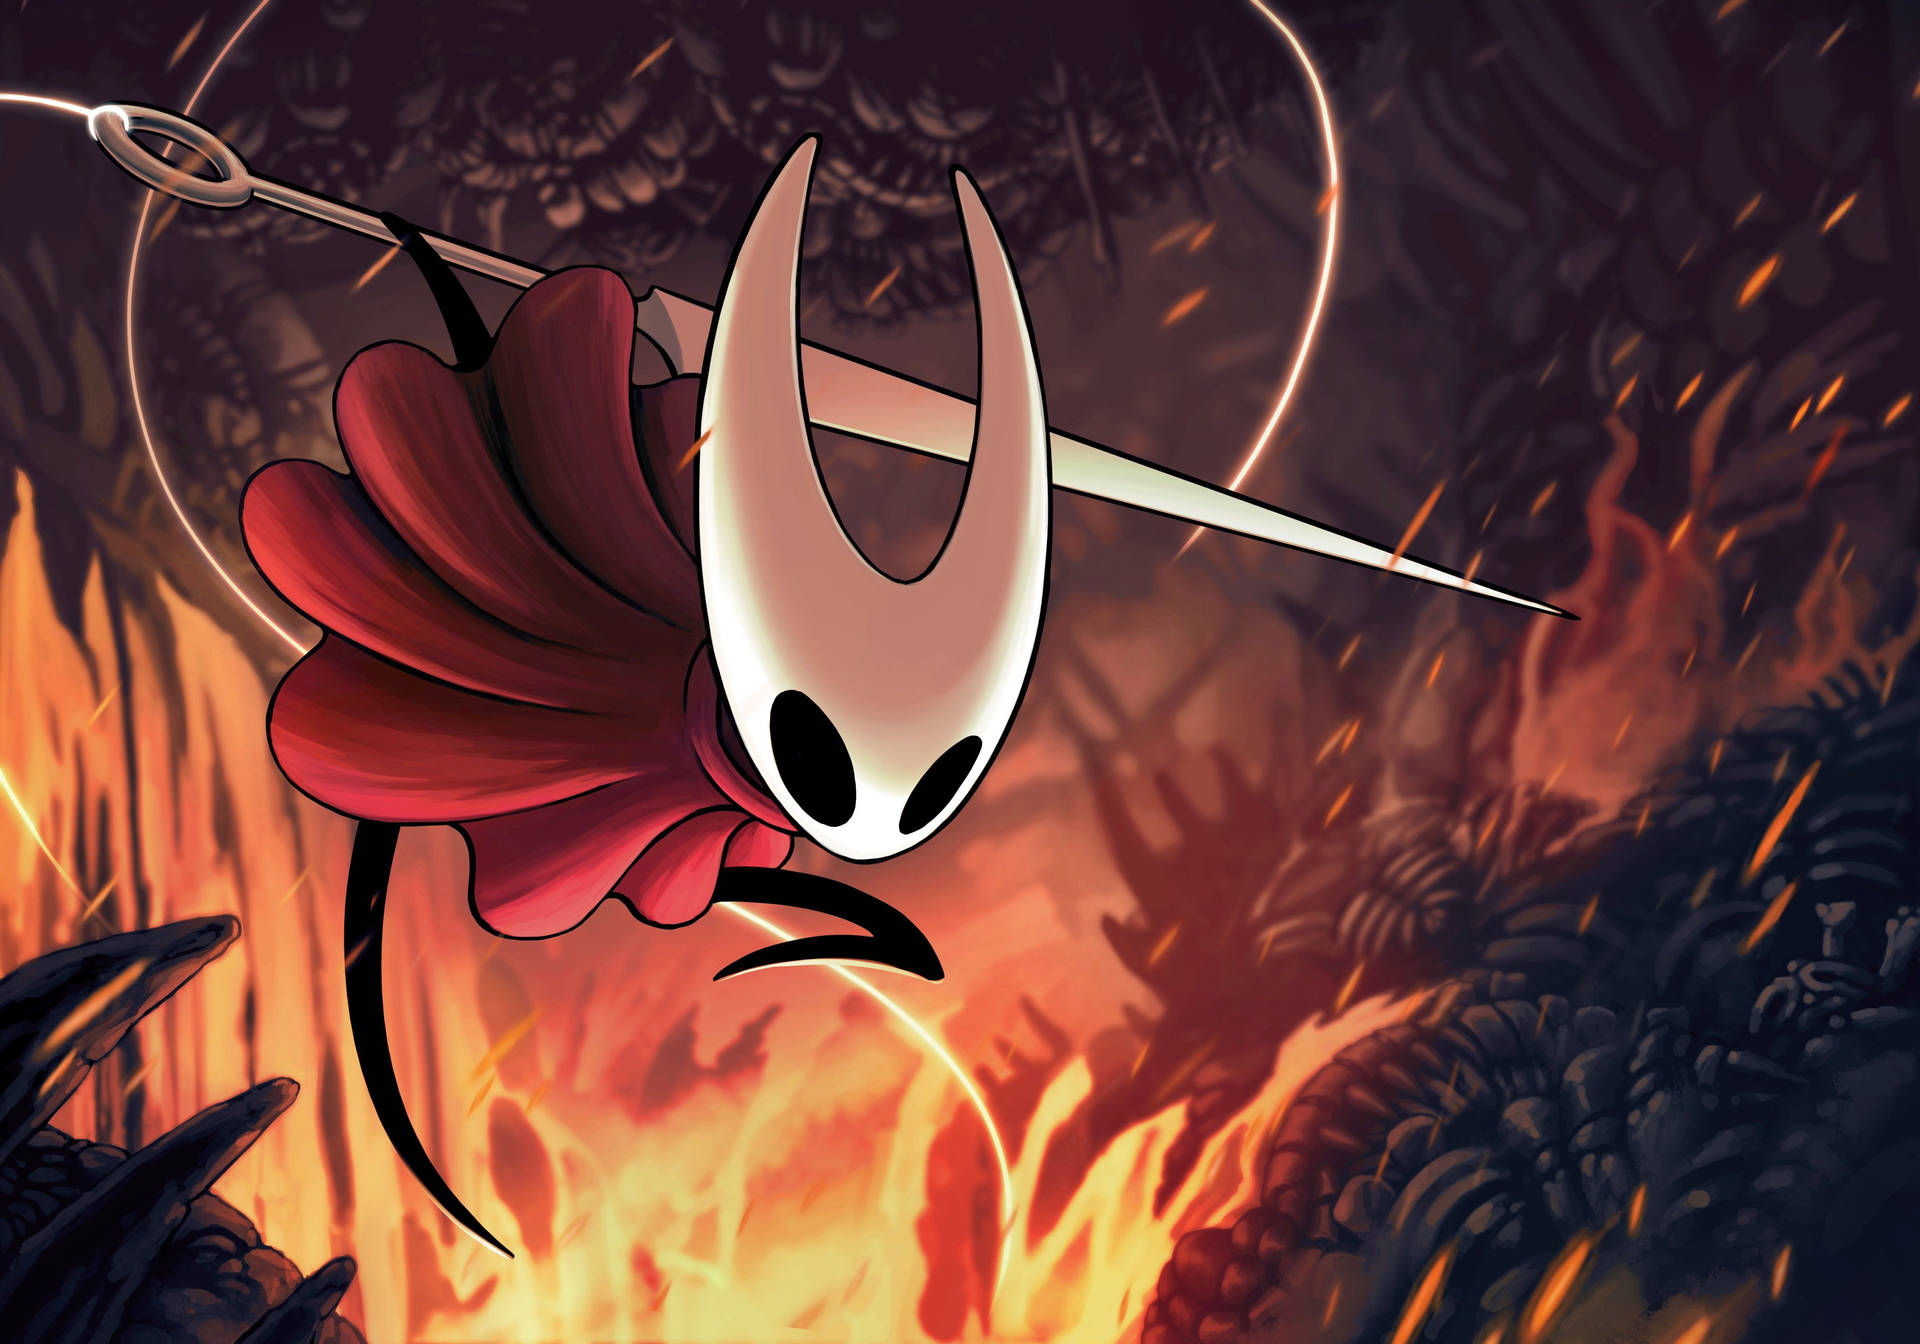 Download Hollow Knight wallpapers for mobile phone free Hollow Knight  HD pictures